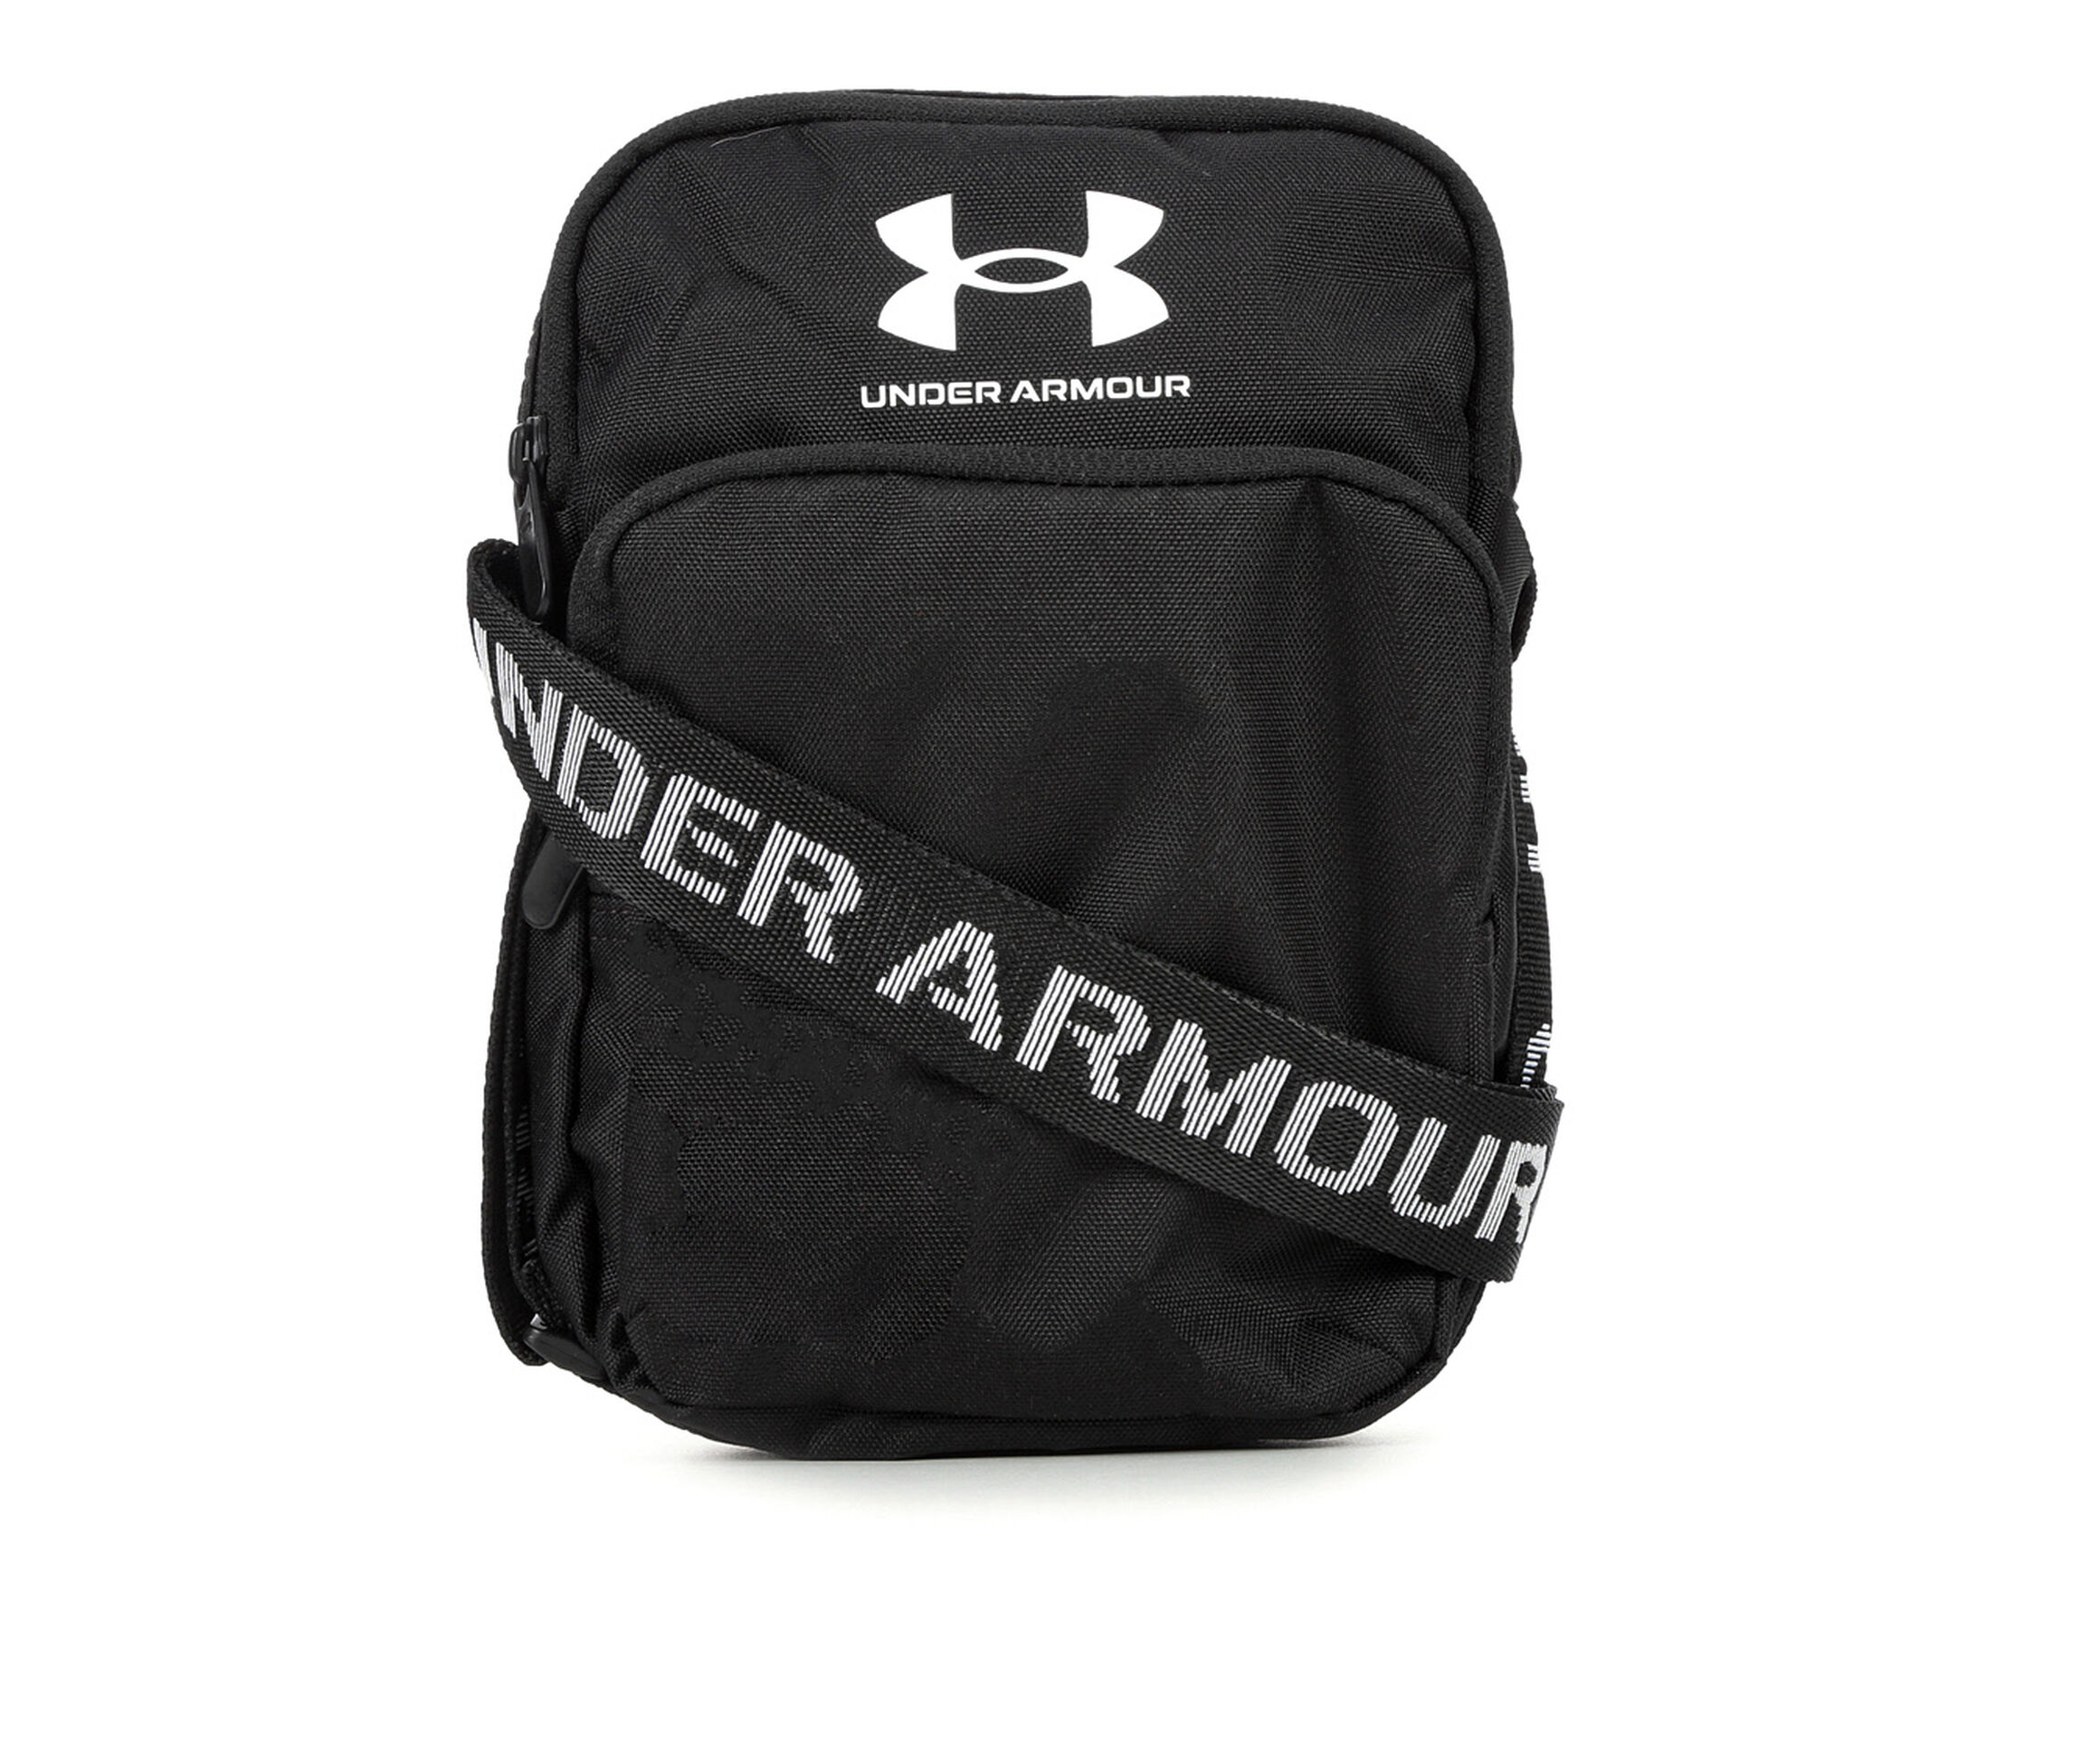 Under Armour Accessories | Shoe Carnival